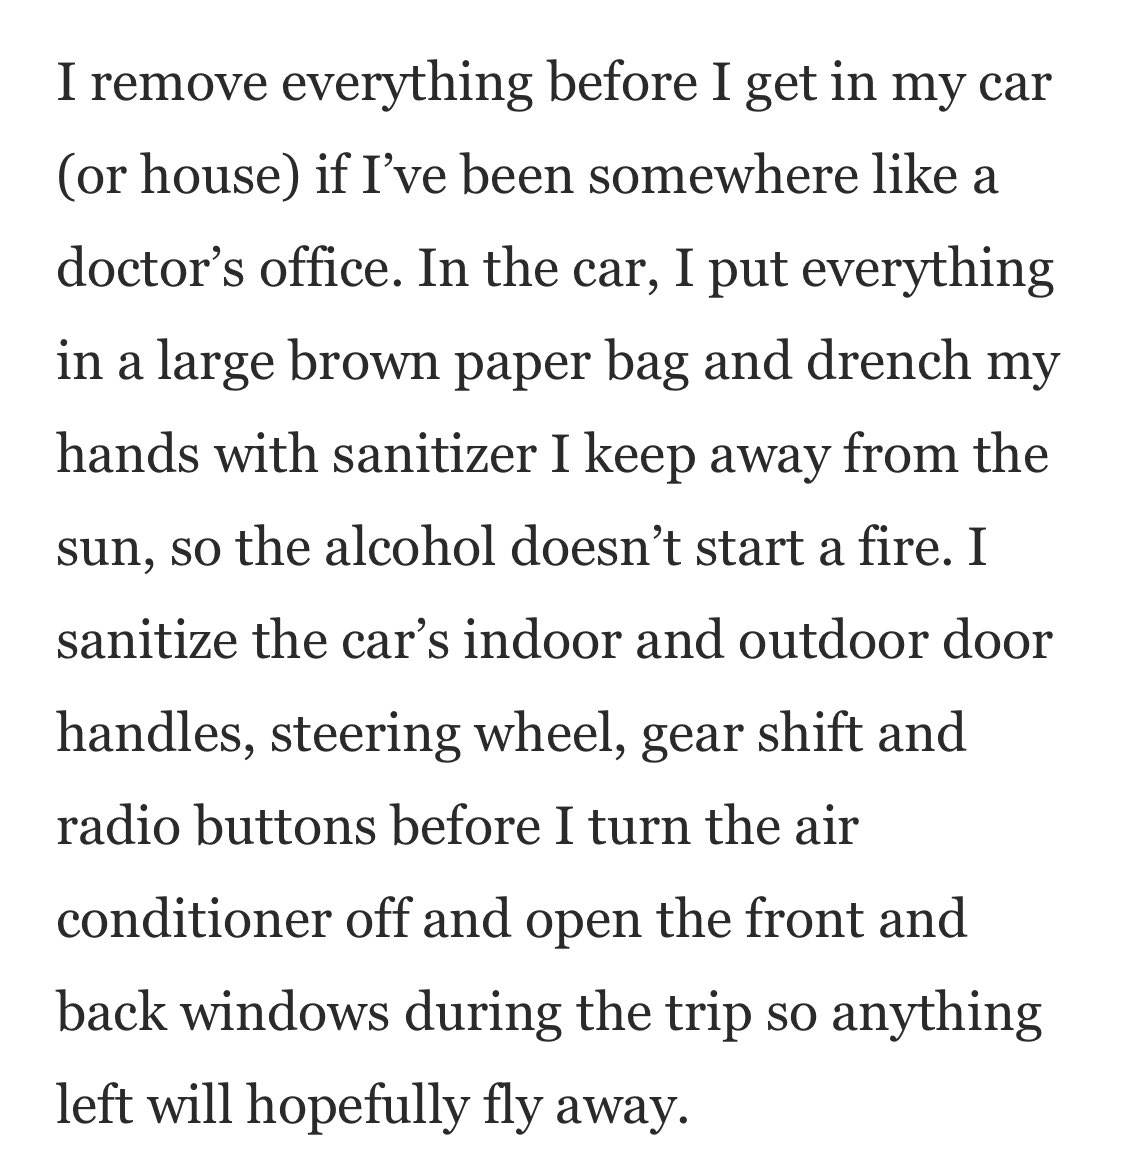 I’m not quite sure how she thinks hand sanitizer just bursts into flames, maybe she means if she stored it on her dash but this part seems to indicate she may think it can spontaneously combust while she slathers it onto her hands and every car surface. I’m concerned. 4/